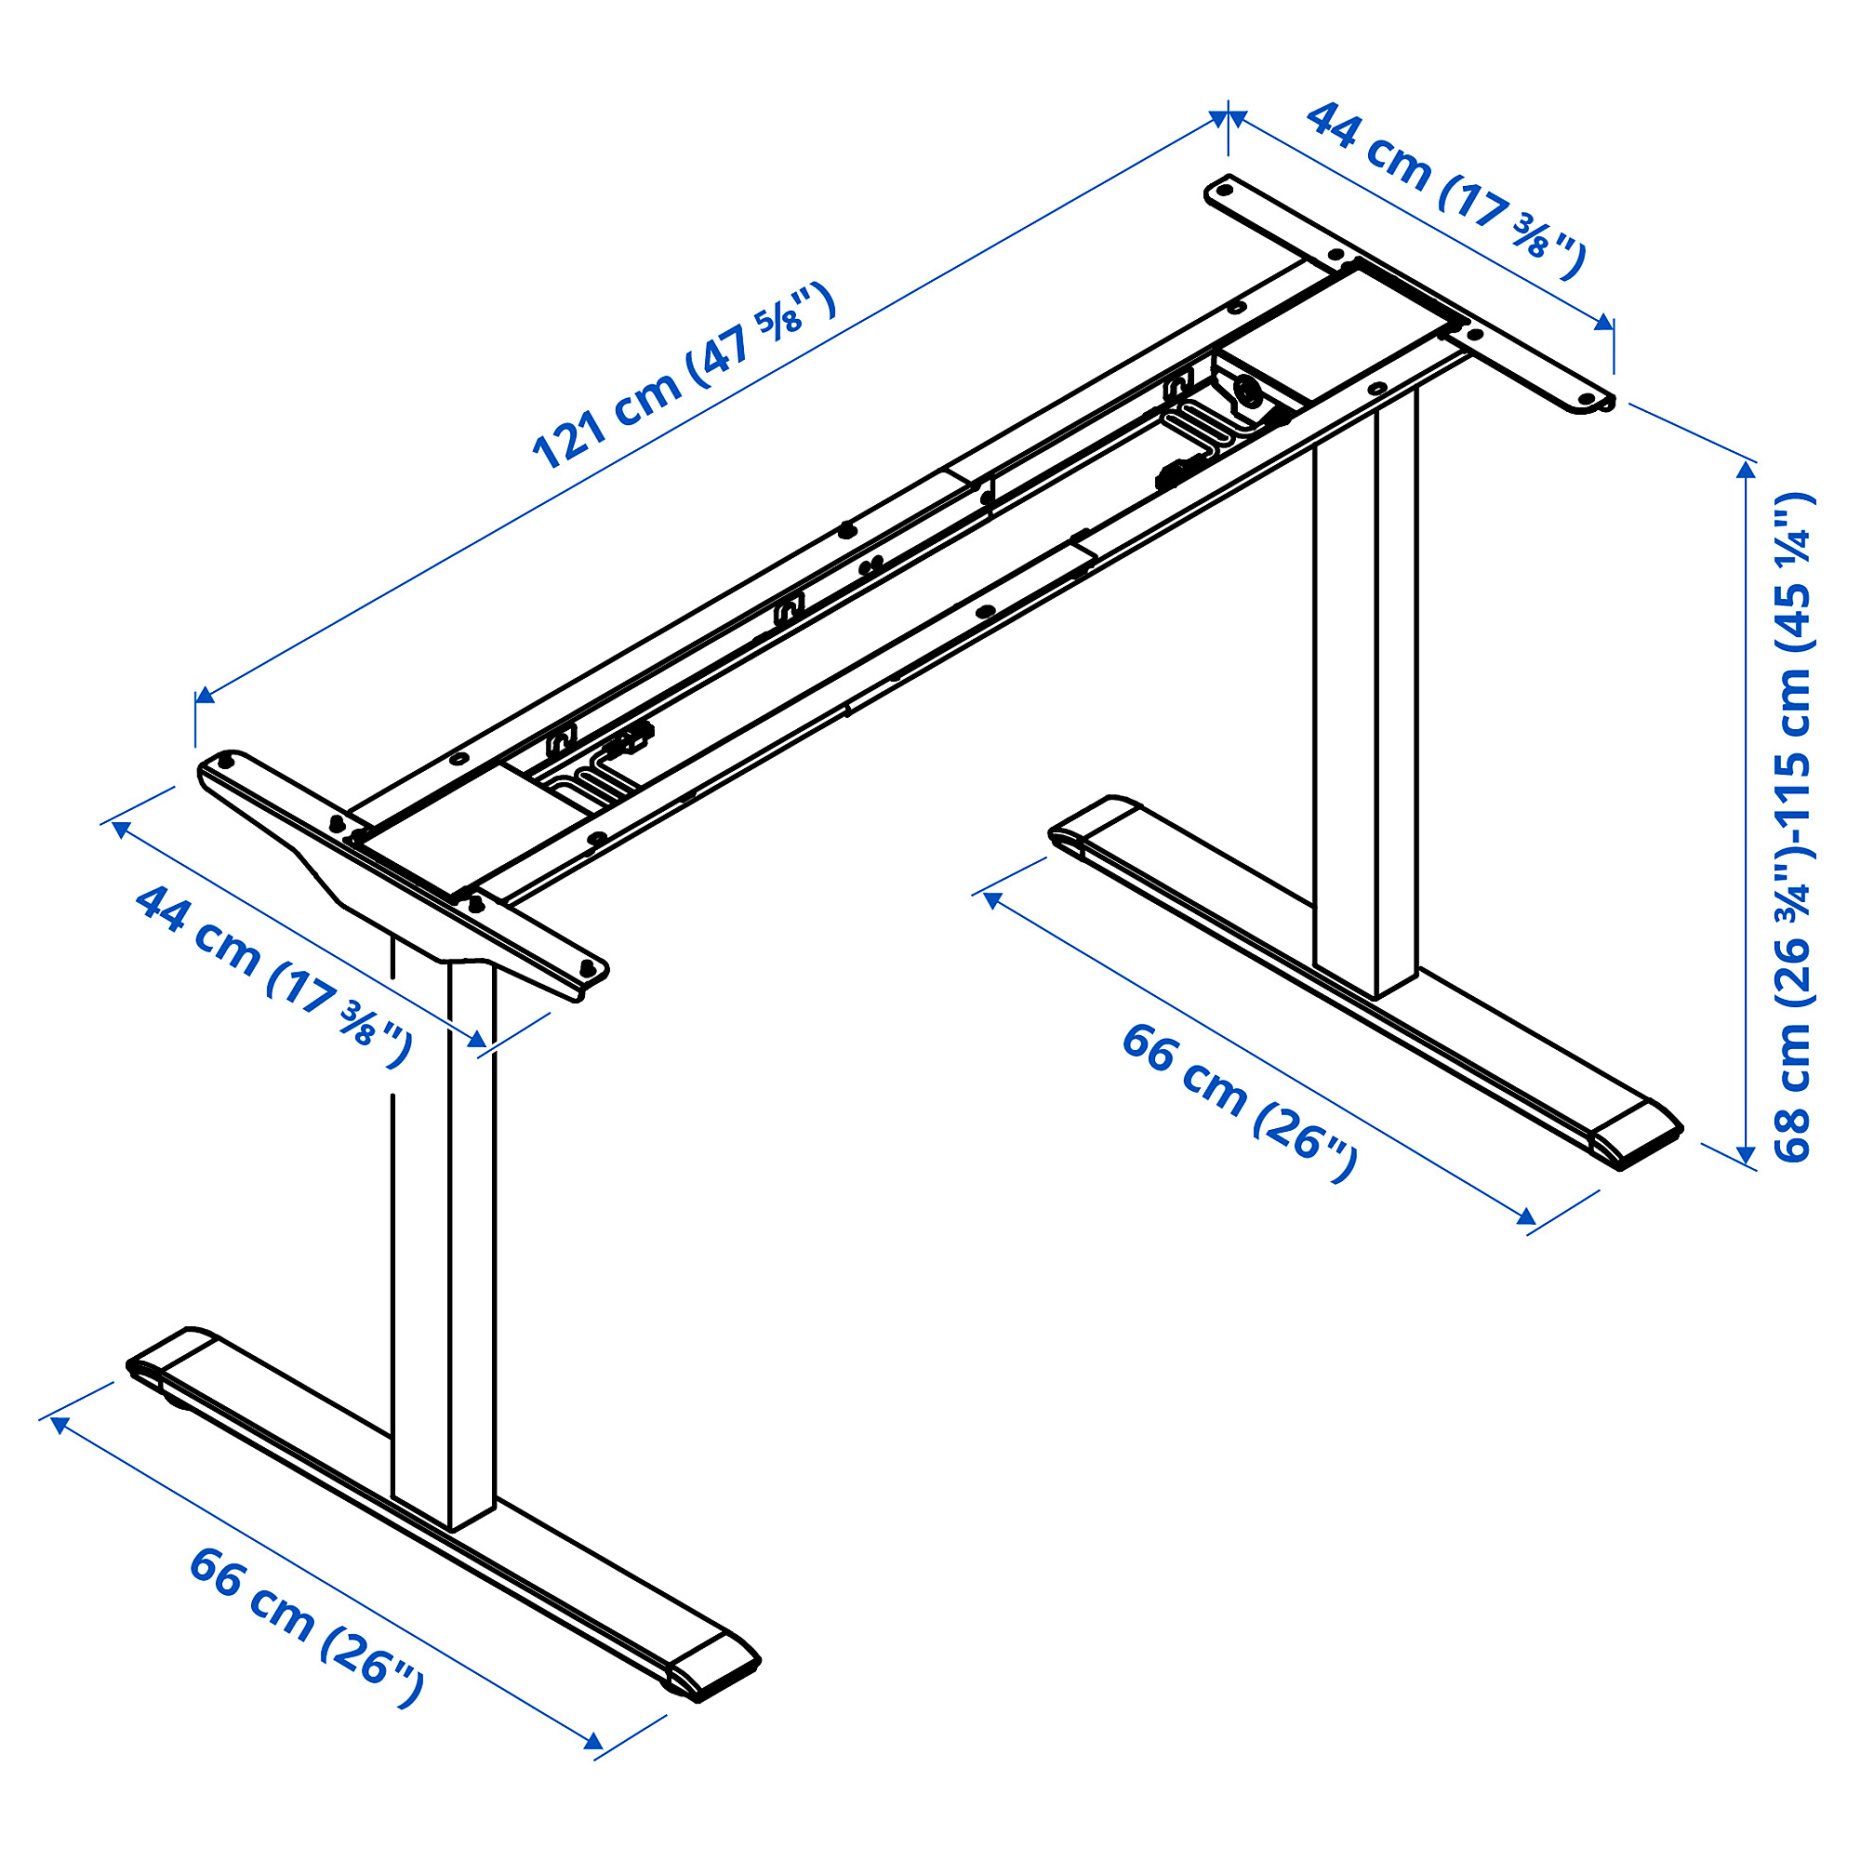 RODULF, underframe sit/stand for table top, 140x80 cm, 604.642.90